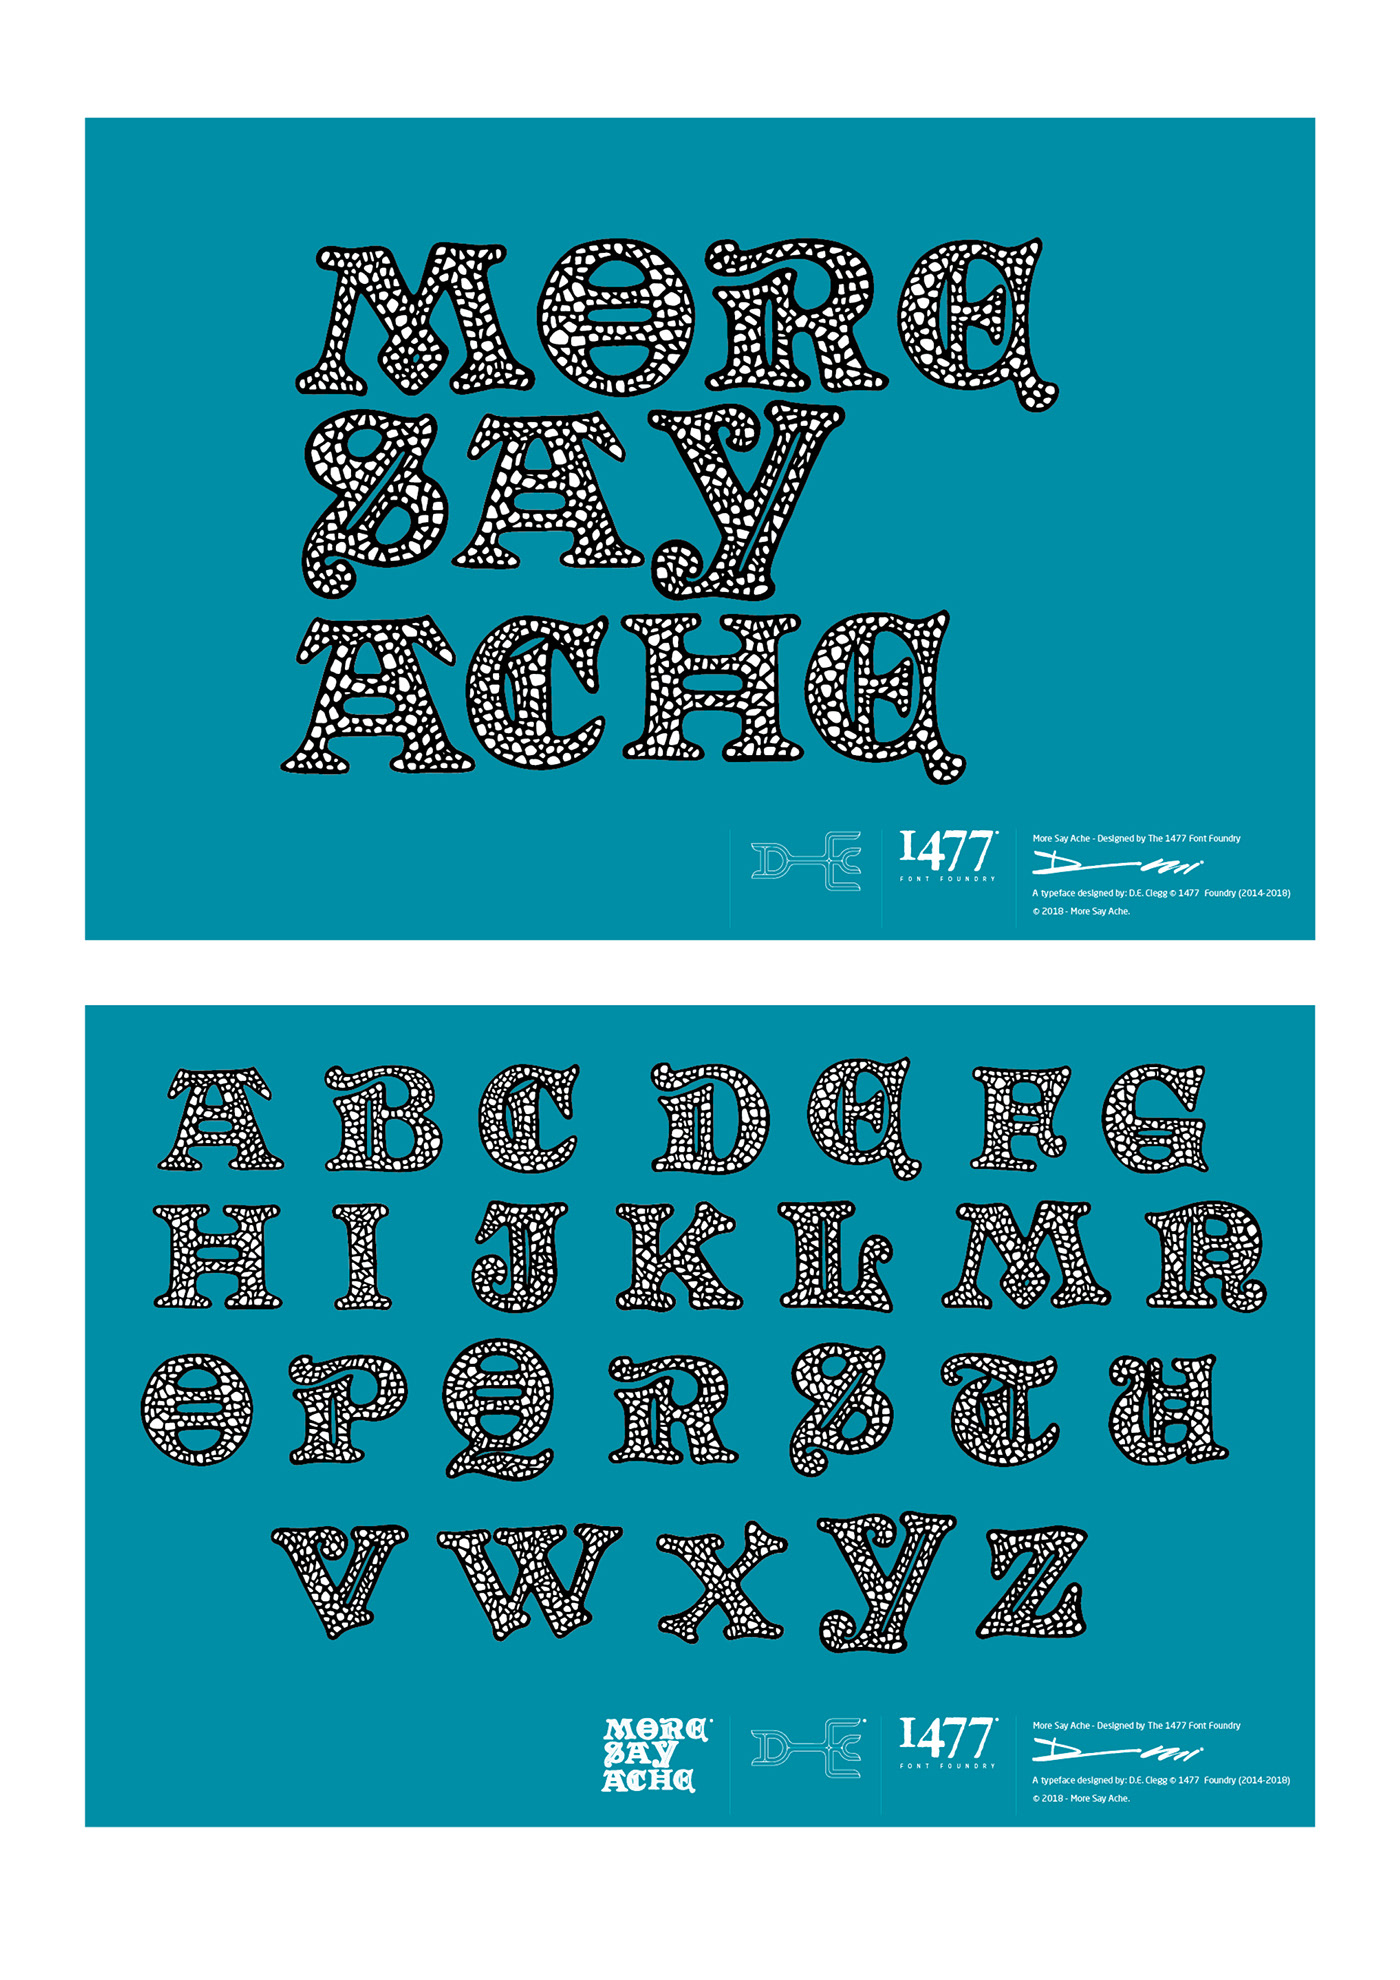 More Say Ache - Typeface Design David Clegg hand drawn font